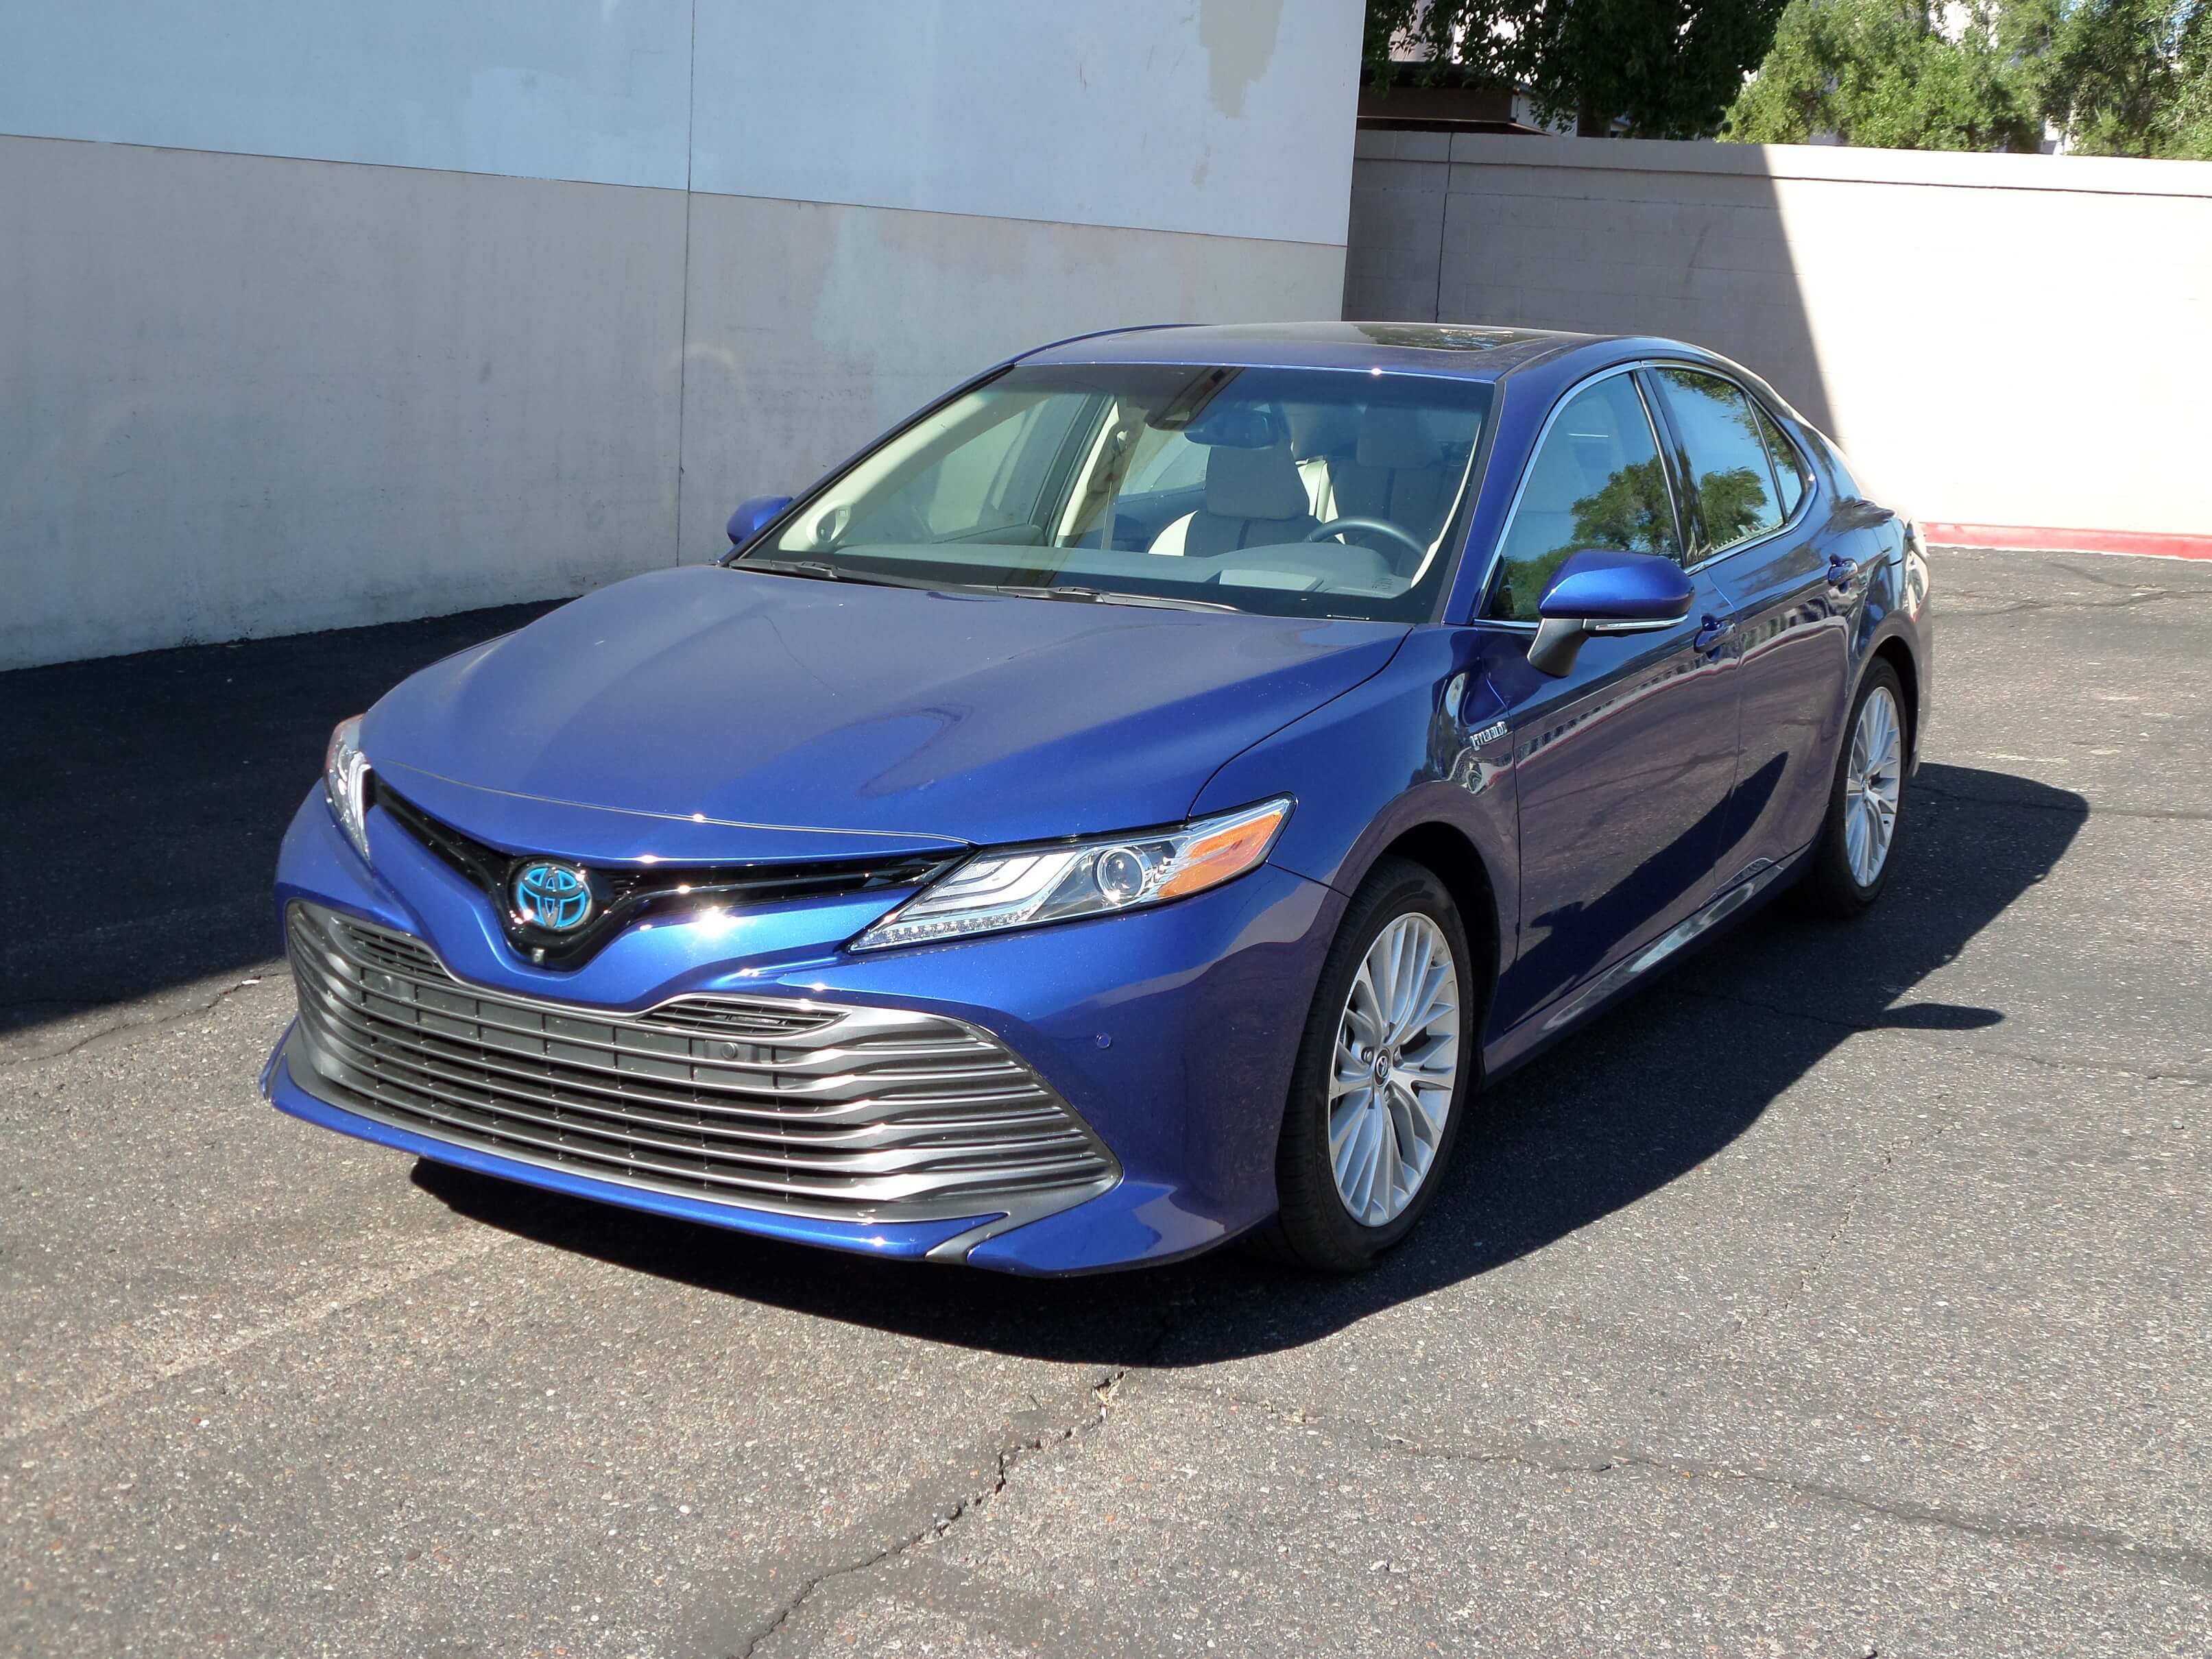 Toyota Camry Hybrid accessories model